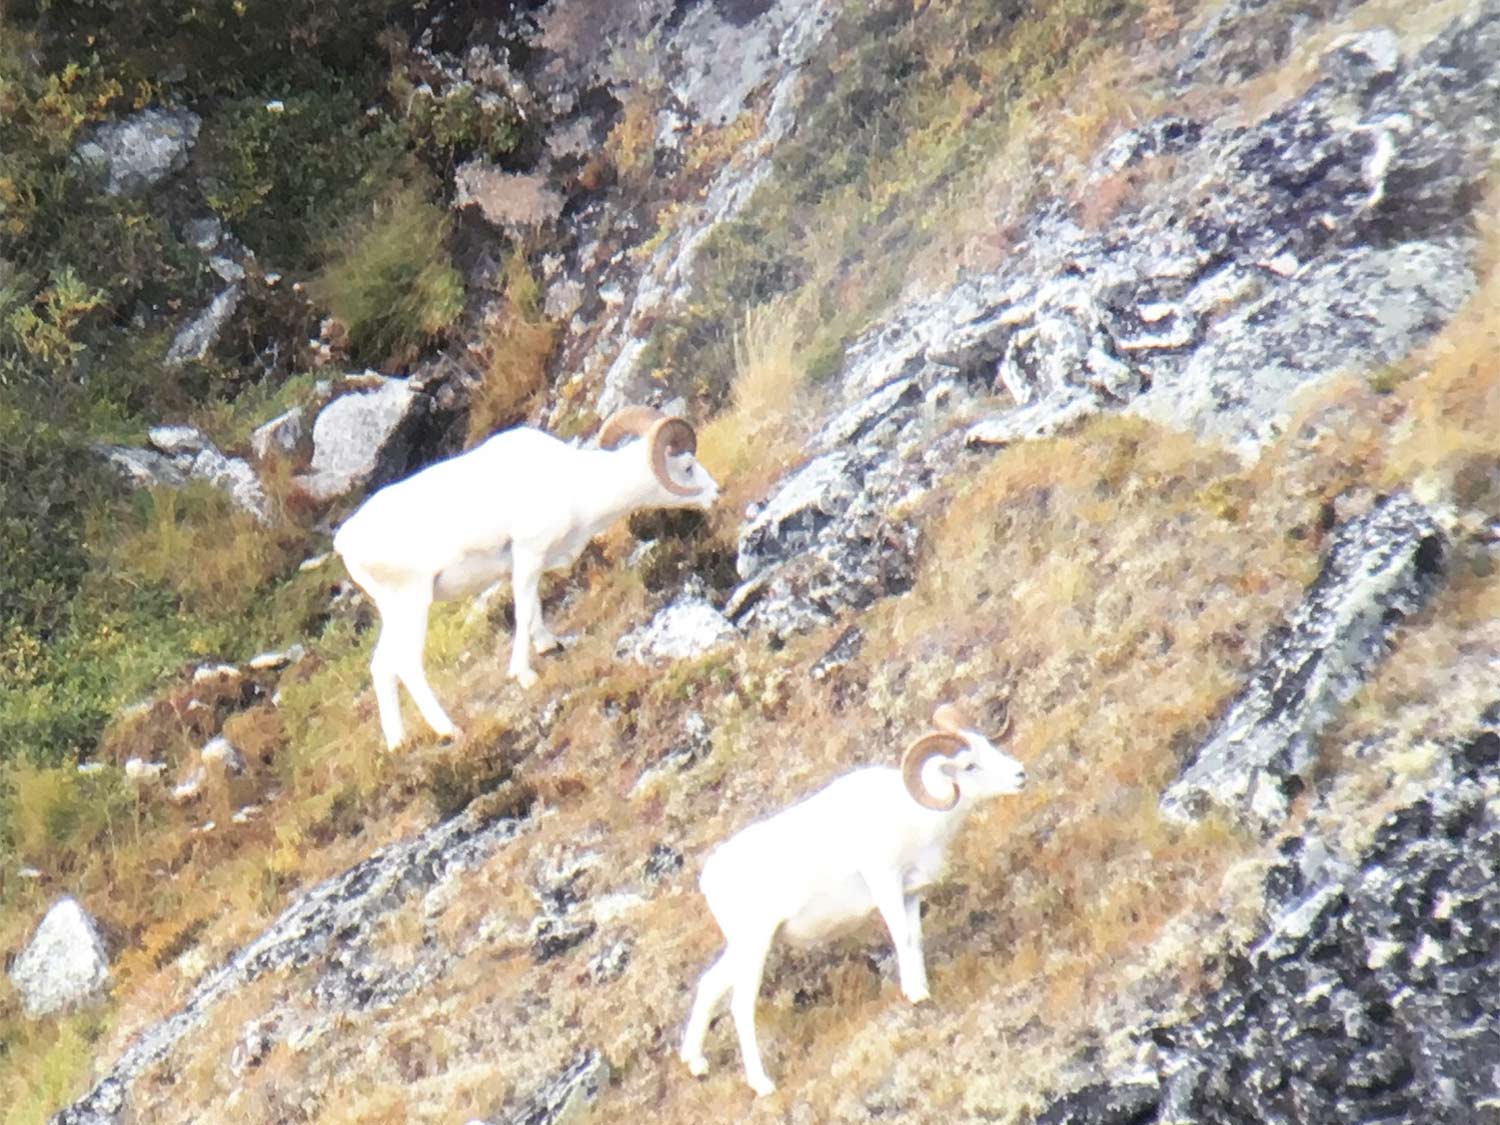 Two white dall sheep on a rocky hillside.